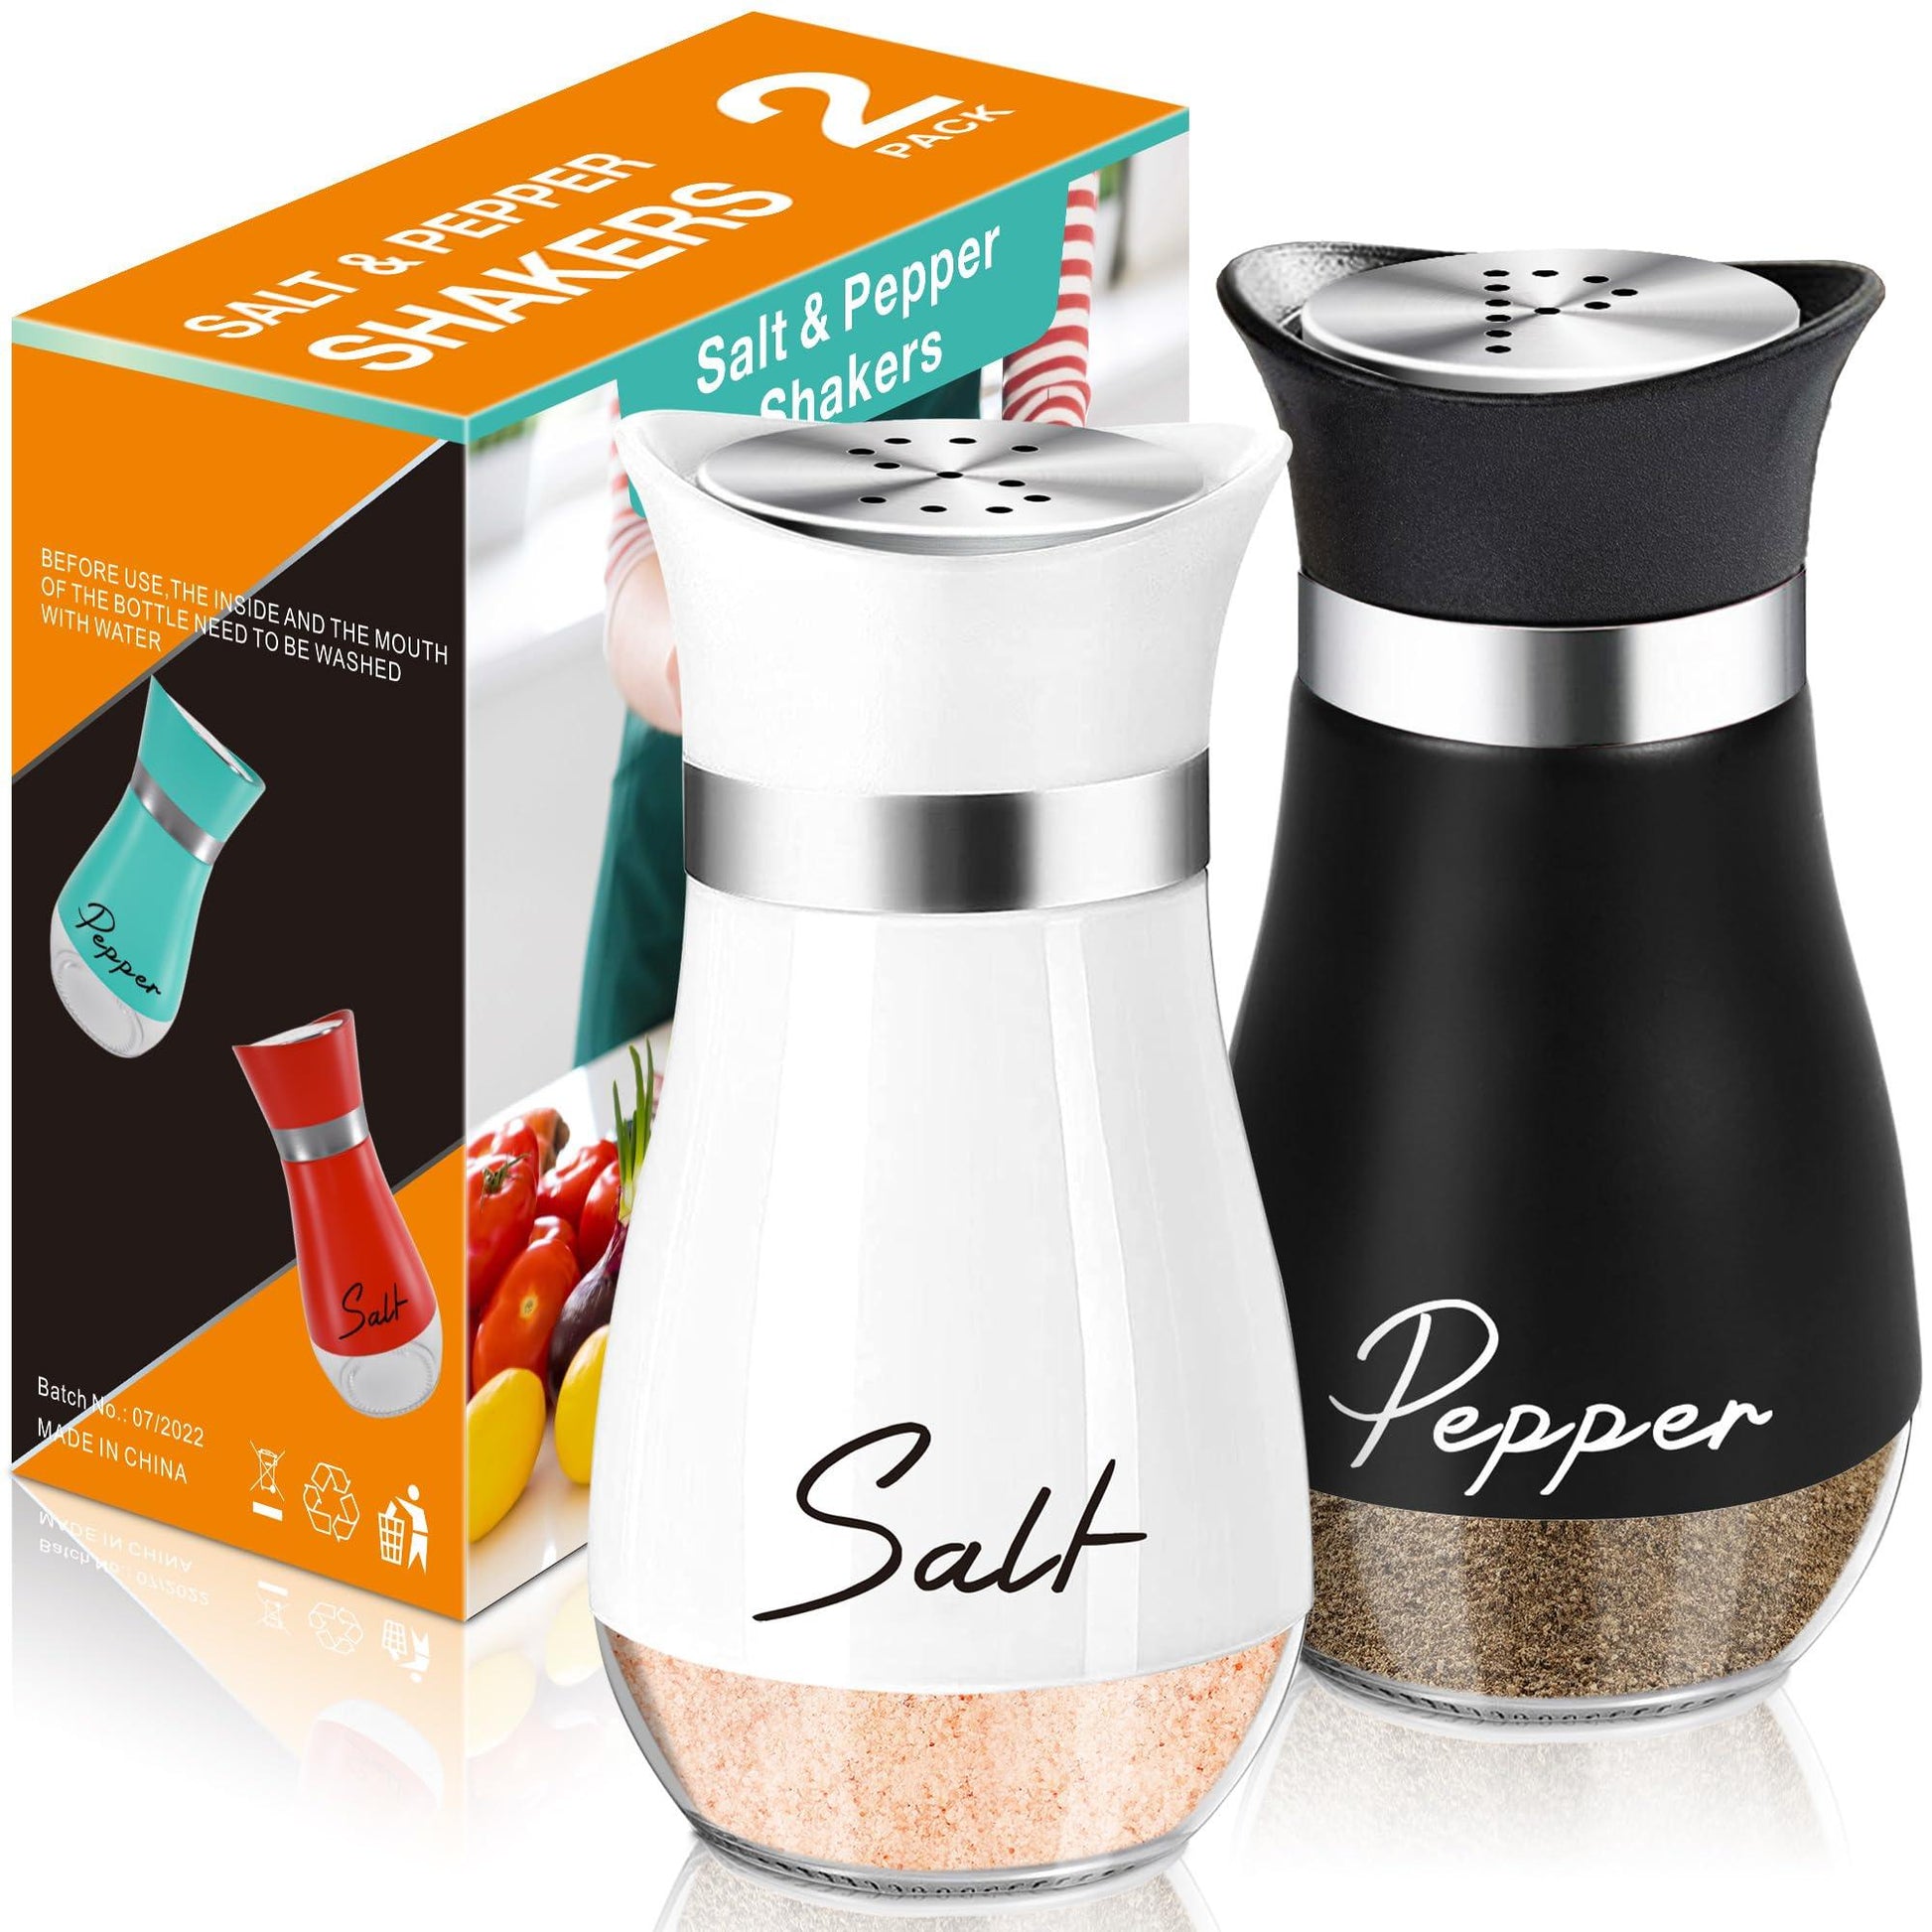 Salt and Pepper Shakers Set,4 oz Glass Bottom Salt Pepper Shaker with Stainless Steel Lid for Kitchen Gadgets Cooking Table, RV, Camp,BBQ Refillable Design (White + Black) - CookCave